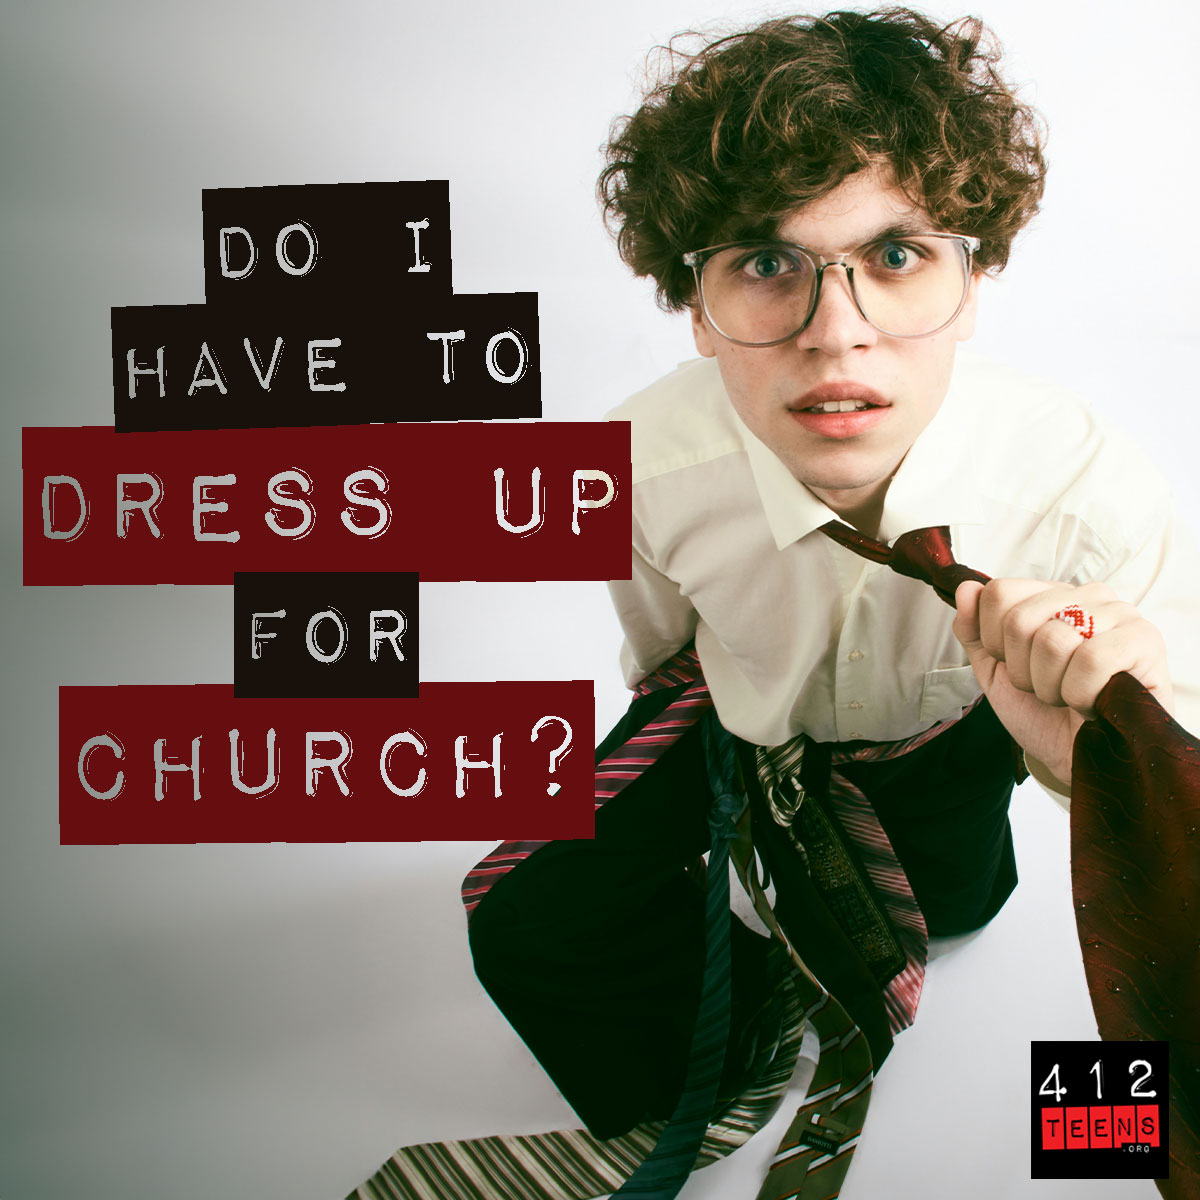 Do I have to dress up for church? 412teens org